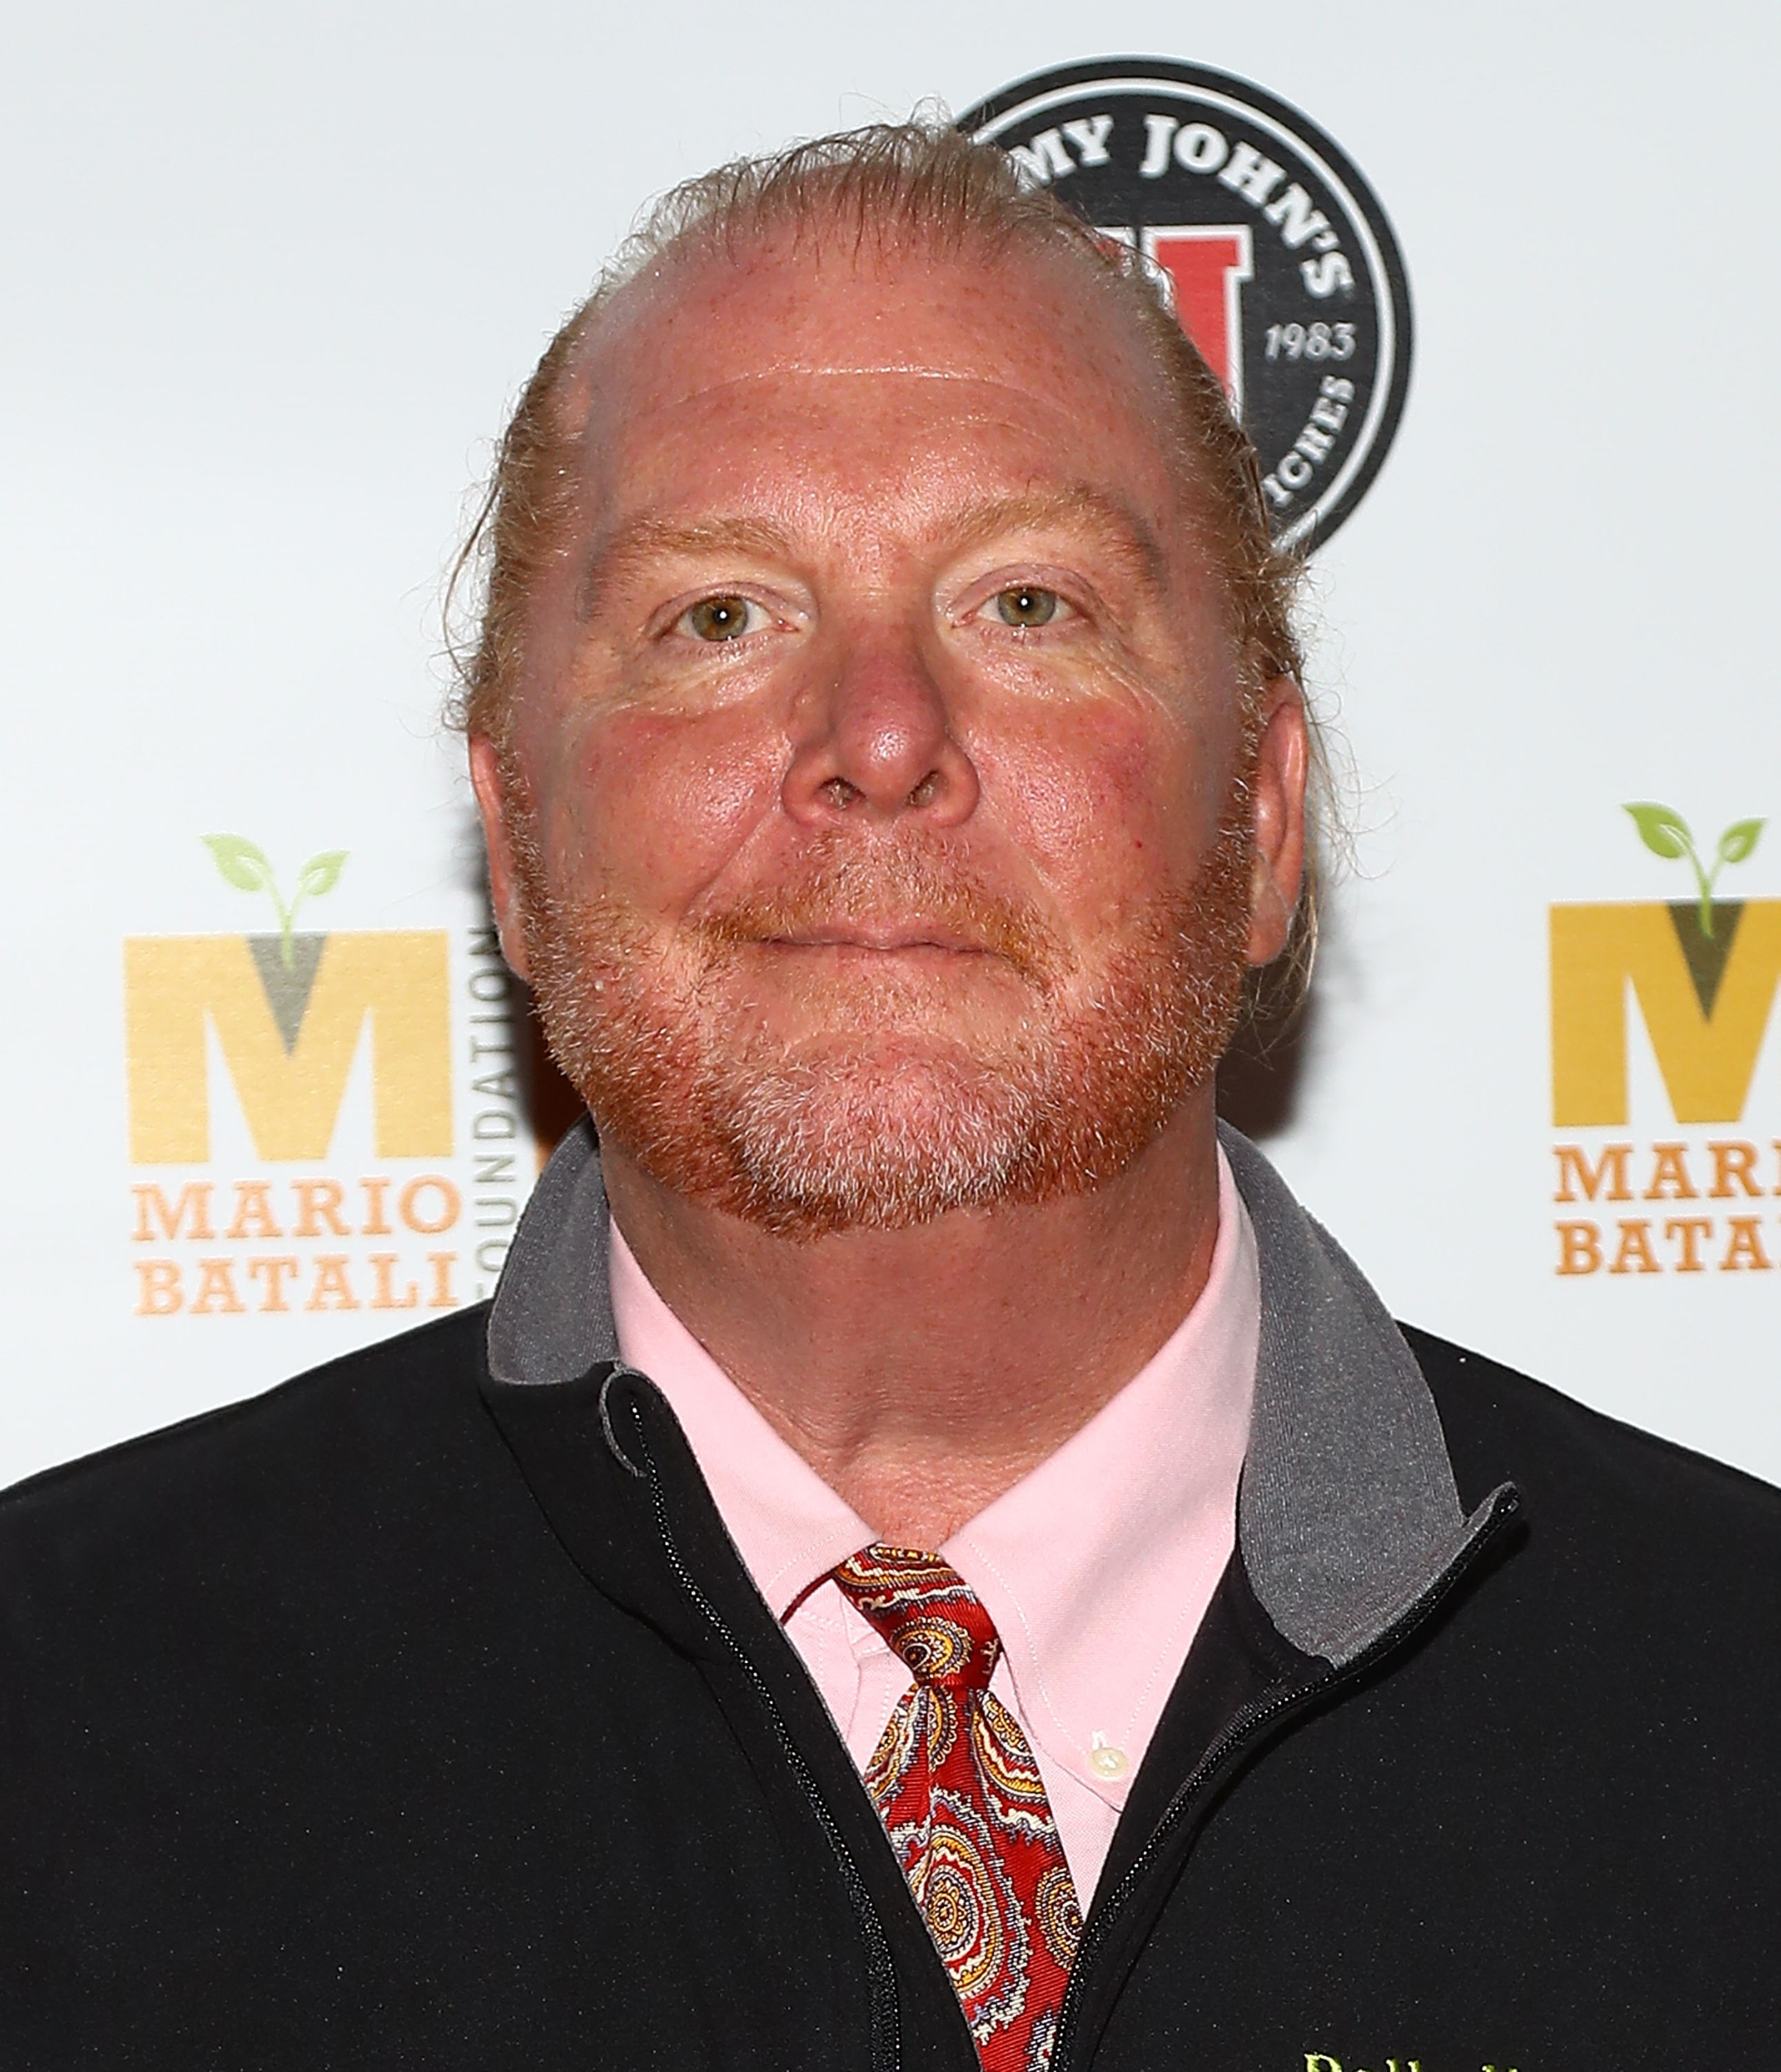 Chef Mario Batali attends a dinner for his foundation on Oct. 15, 2017 in New York City. Batali is reportedly under investigation by the New York Police Department for sexual misconduct (Astrid Stawiarz—Getty Images)